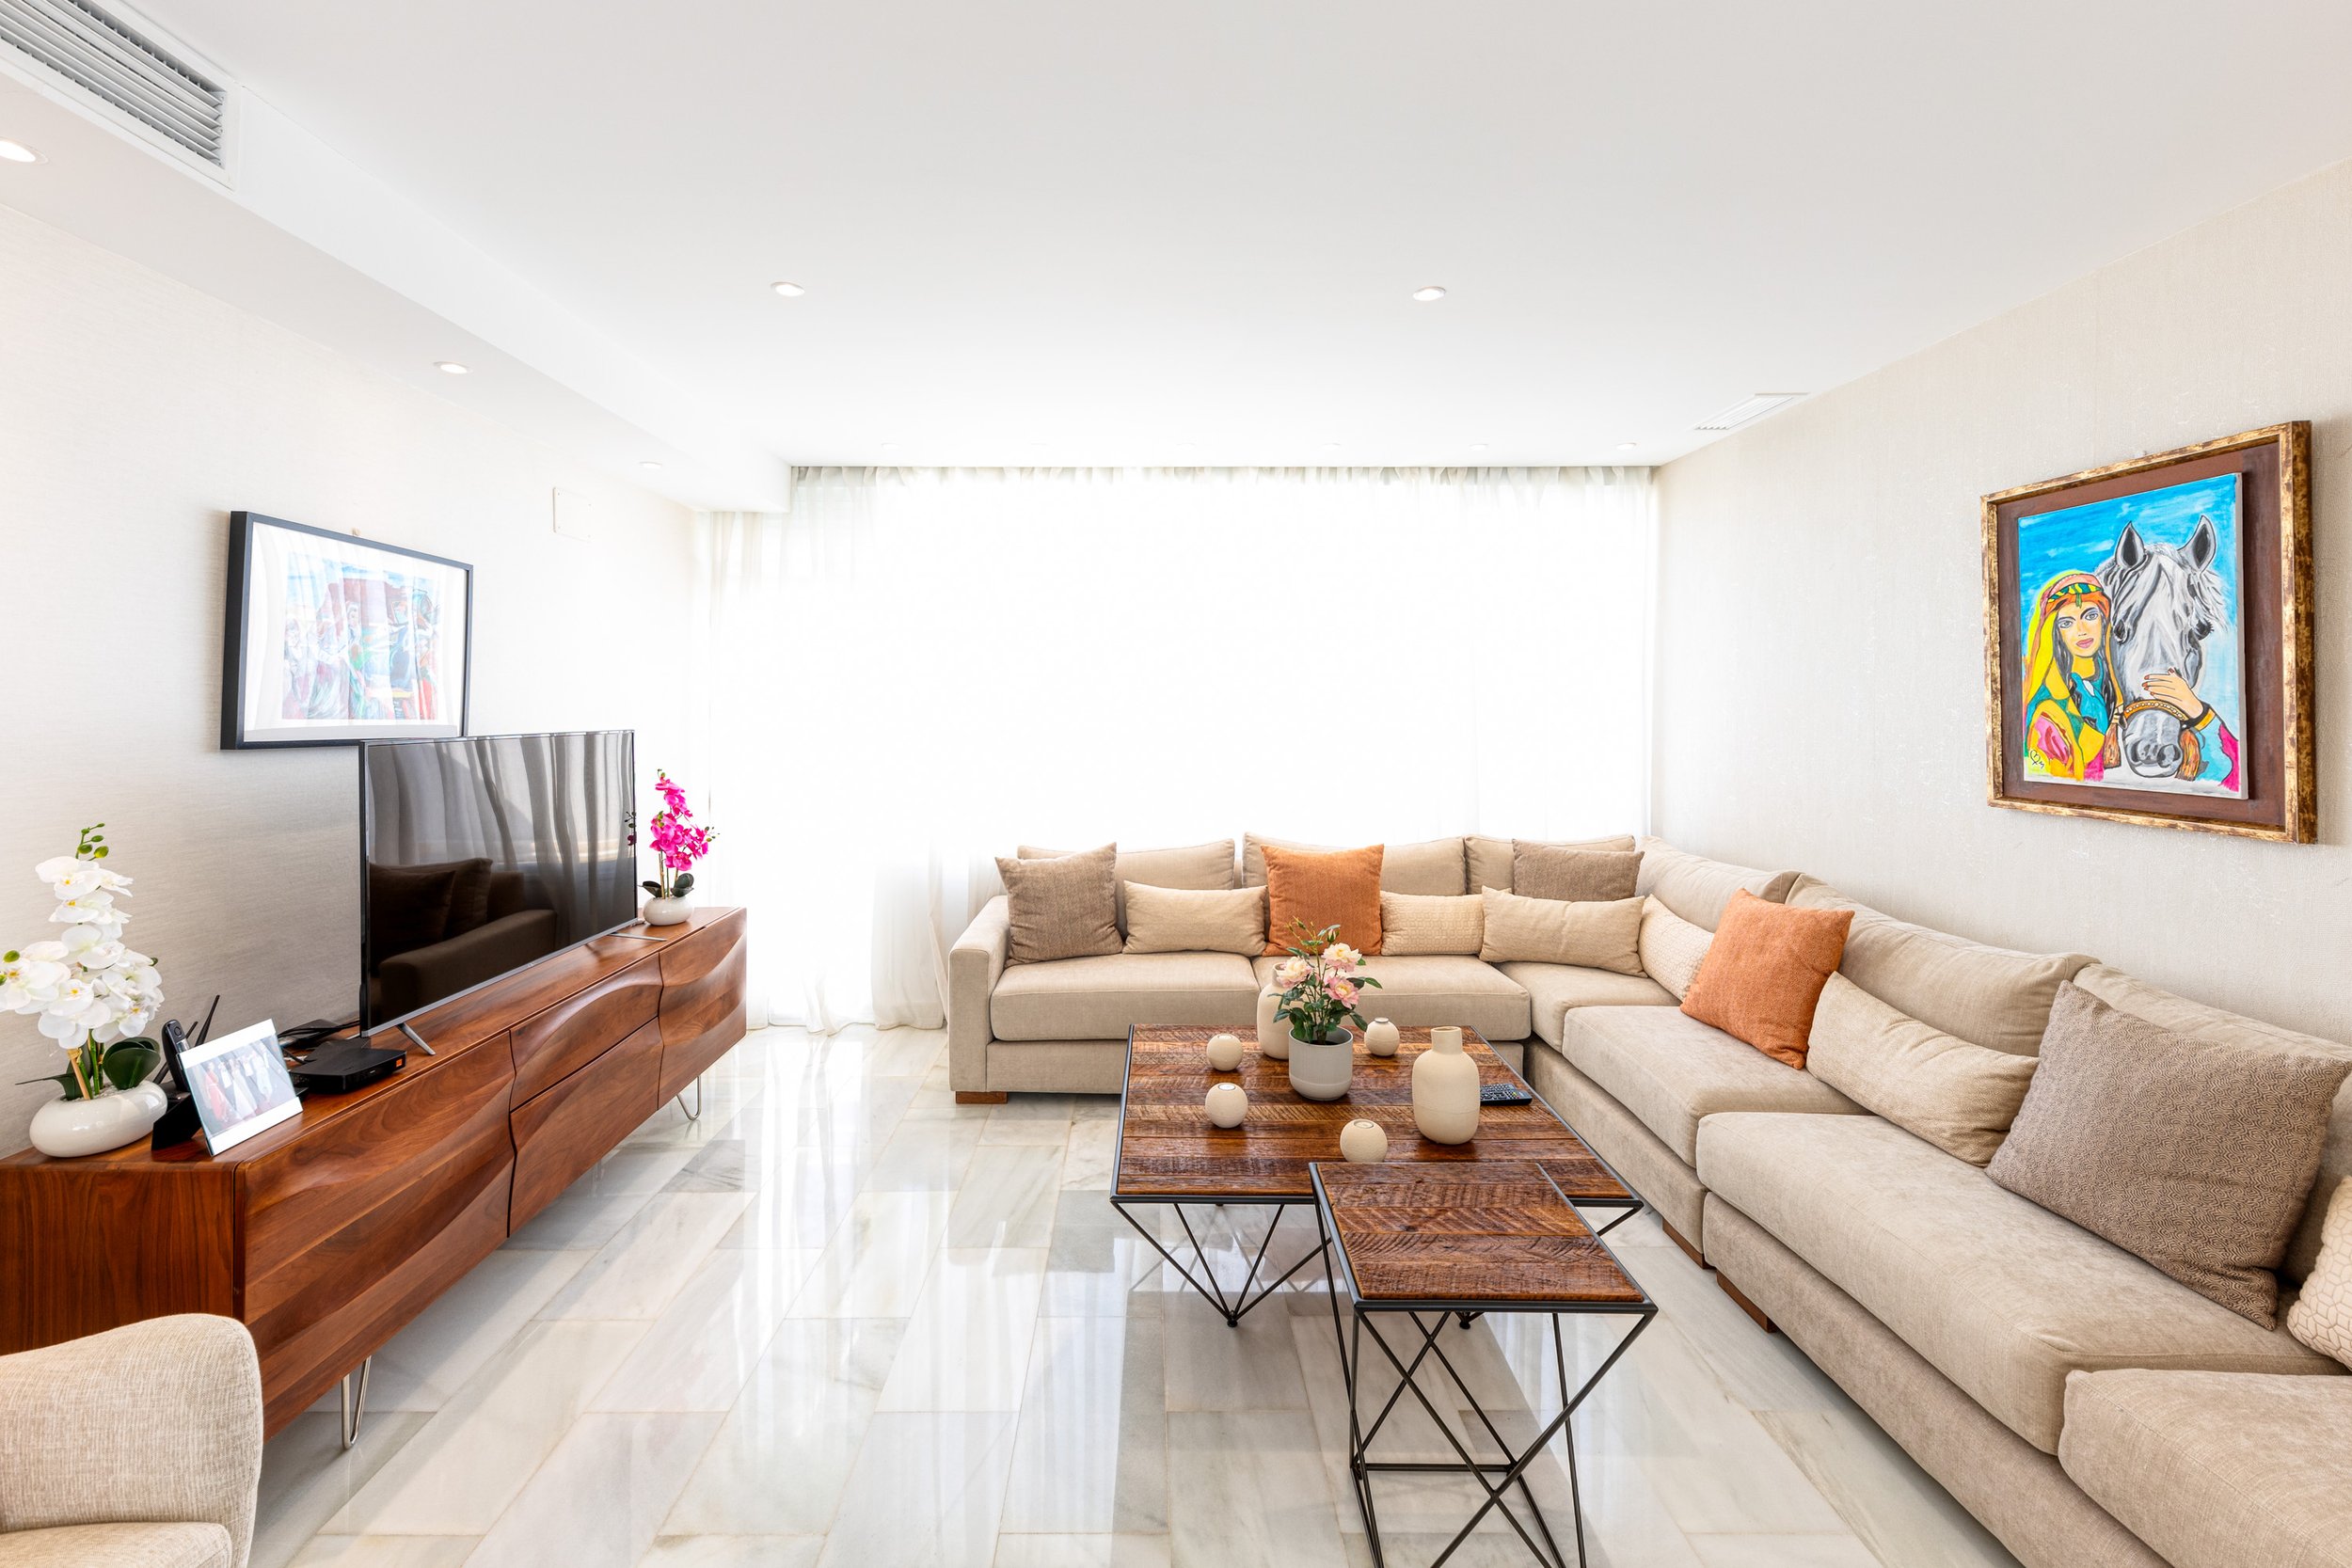 for-sale-renovated-three-bedroom-duplex-penthouse-rio-real-marbella-fs8795-10.jpg